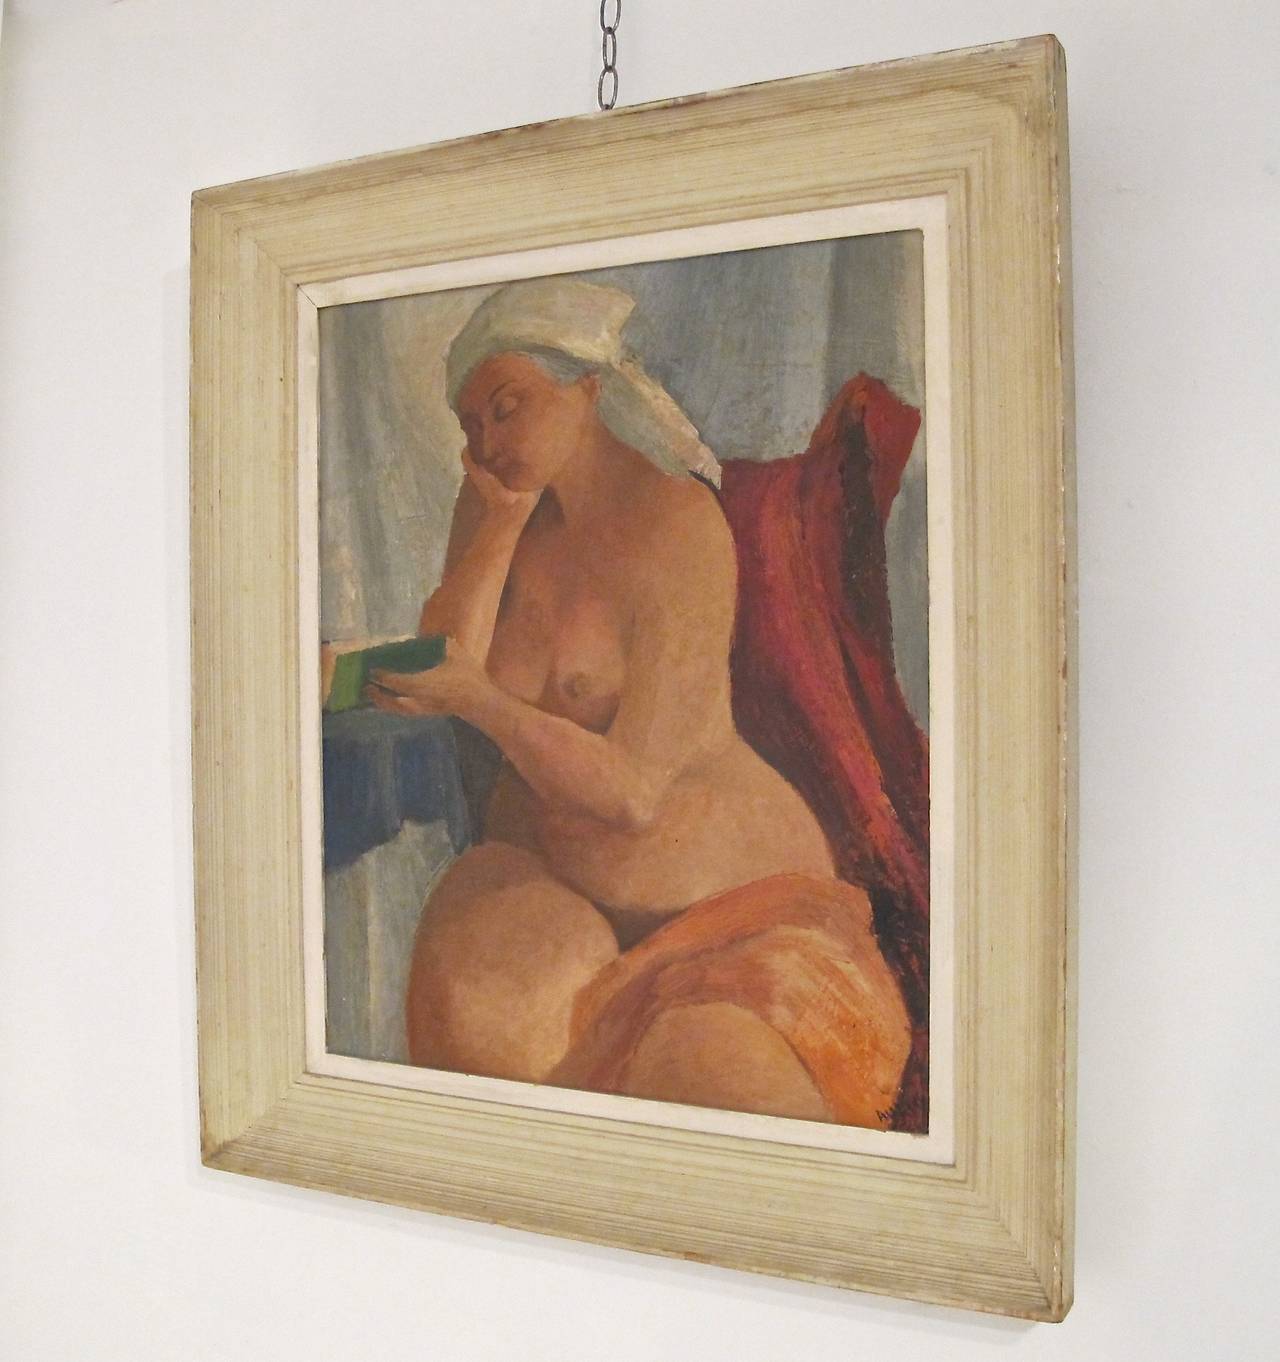 Mid-Century Modernist nude oil painting, beautifully painted and lovely colors, signed but signature illegible. Oil on canvas in original wood frame.